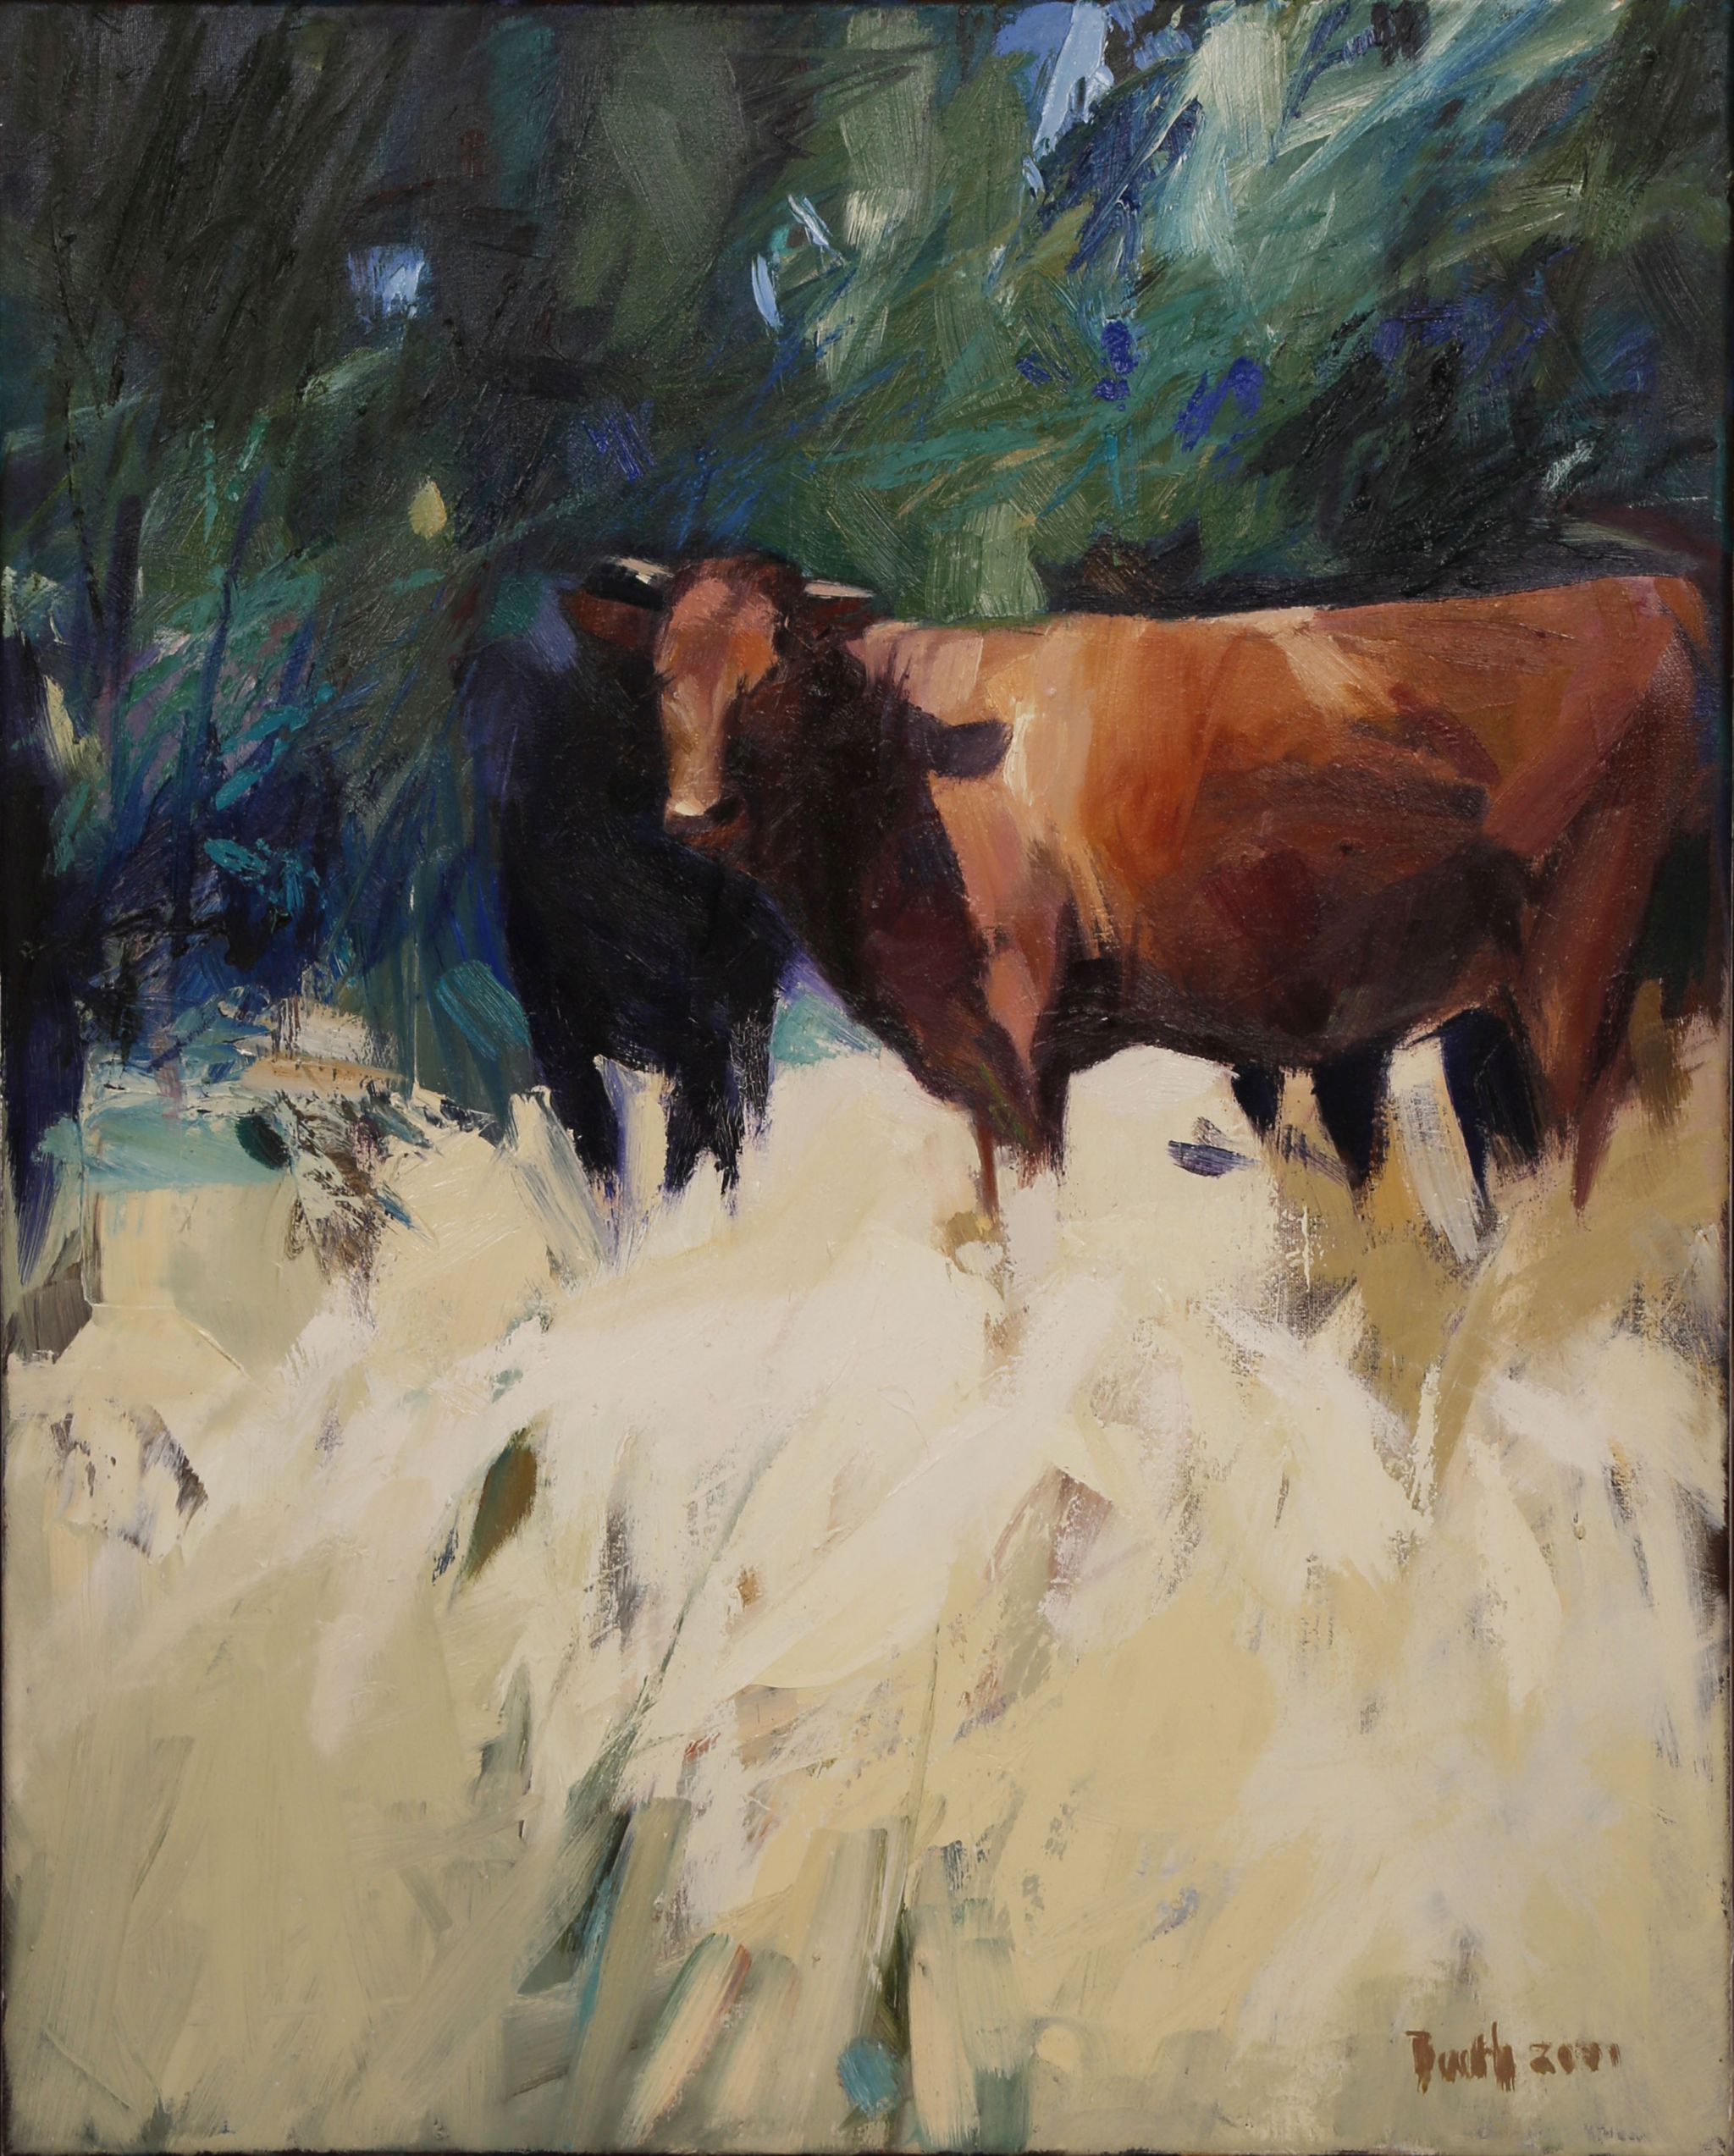 Bob Booth (Australian, born 1948), untitled, 2001, oil on canvas, landscape with cows, signed and